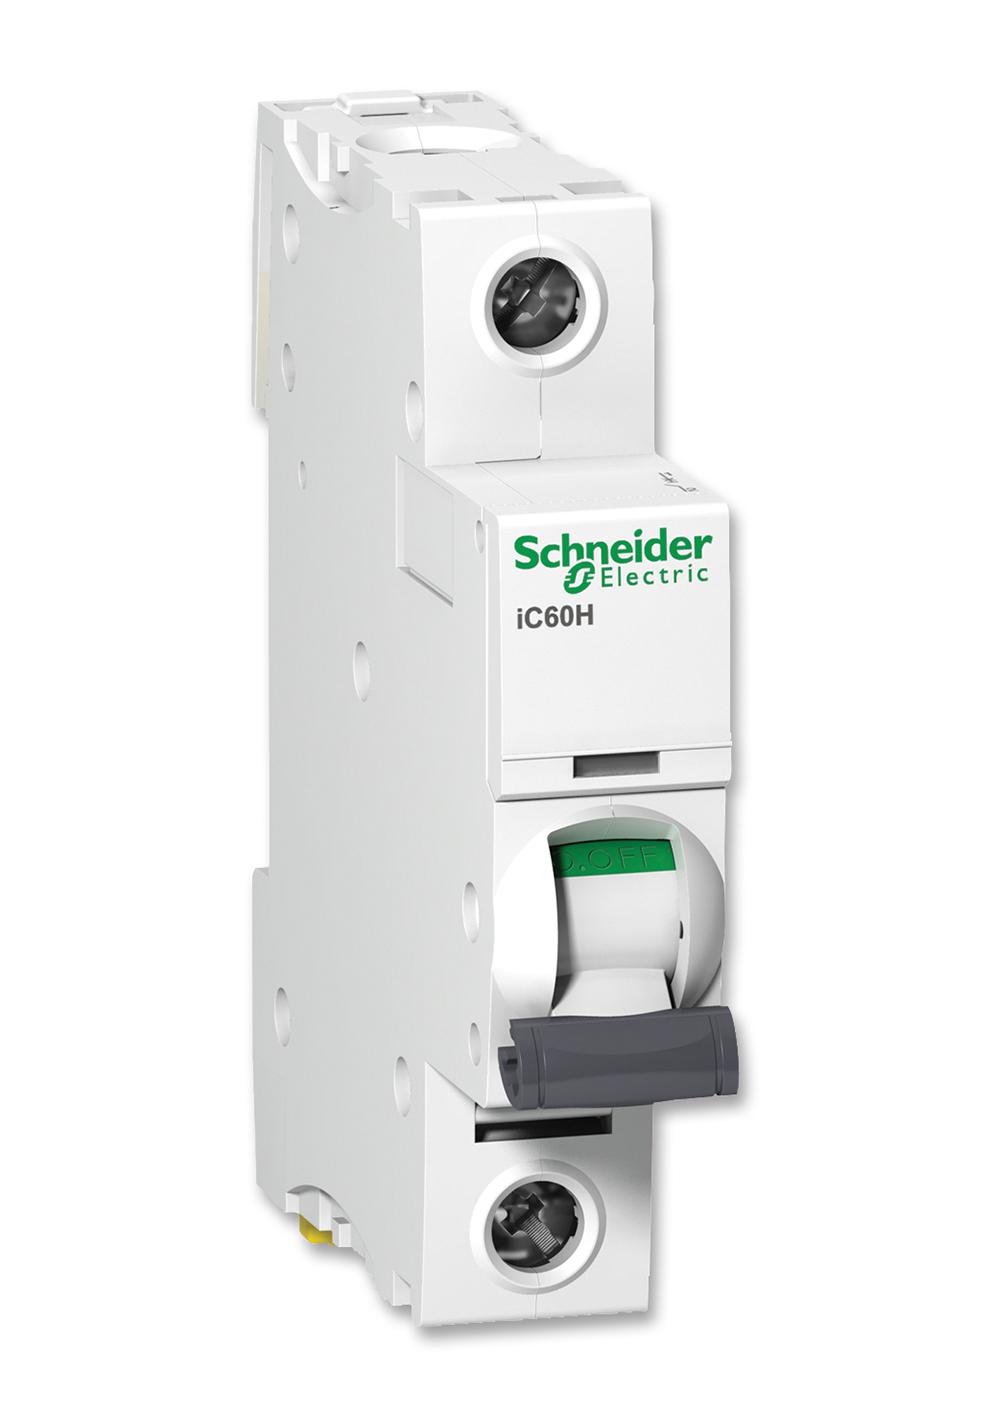 A9F55125 CIRCUIT BREAKER, THERMAL MAGNETIC, 1POLE SCHNEIDER ELECTRIC